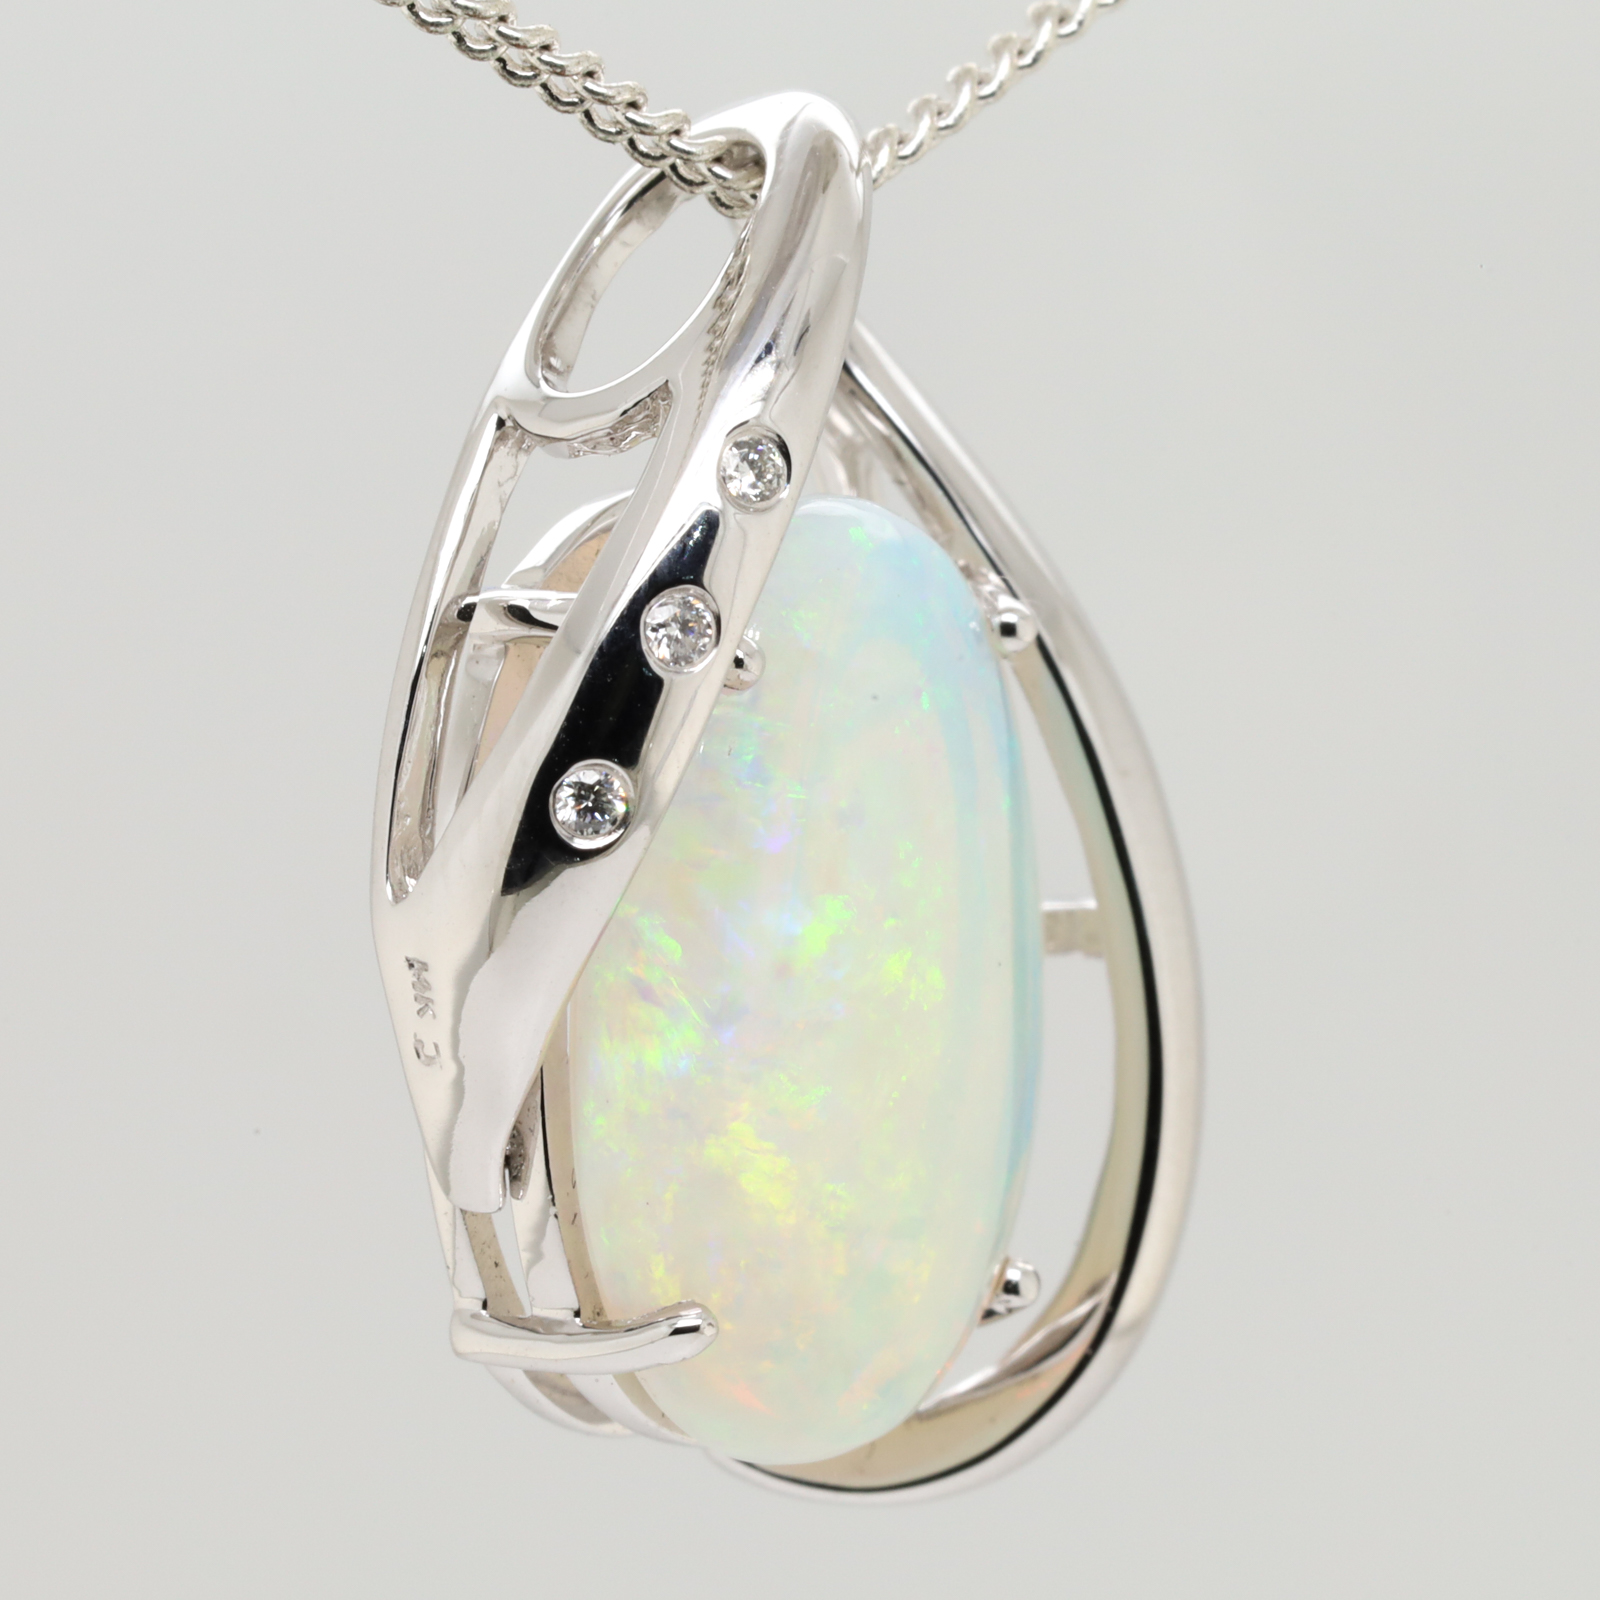 White Gold Blue Pink Green Solid Australian Crystal Opal Diamond Necklace Pendant